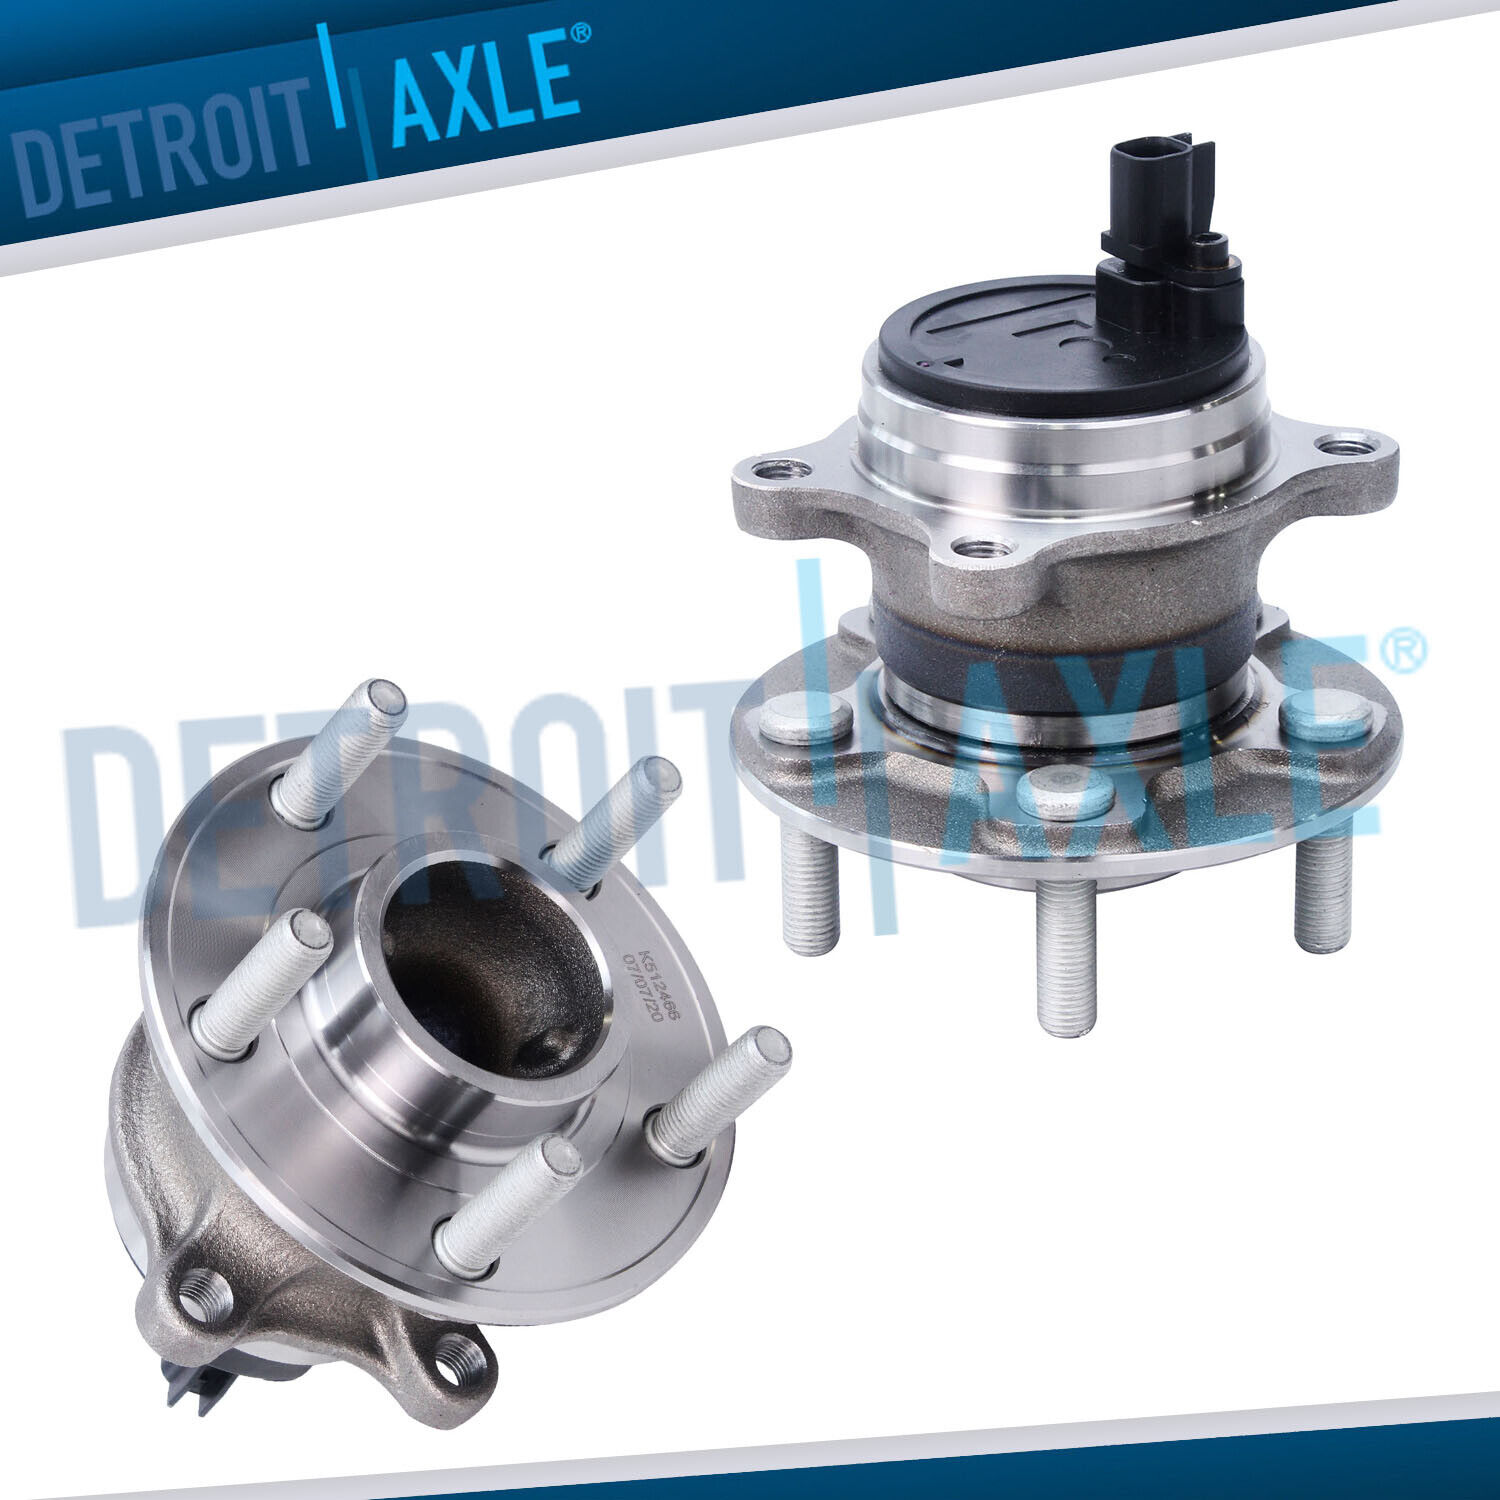 REAR Wheel Bearing Hubs for 2012 2013 - 2018 Ford Focus W/O Active Park Assist